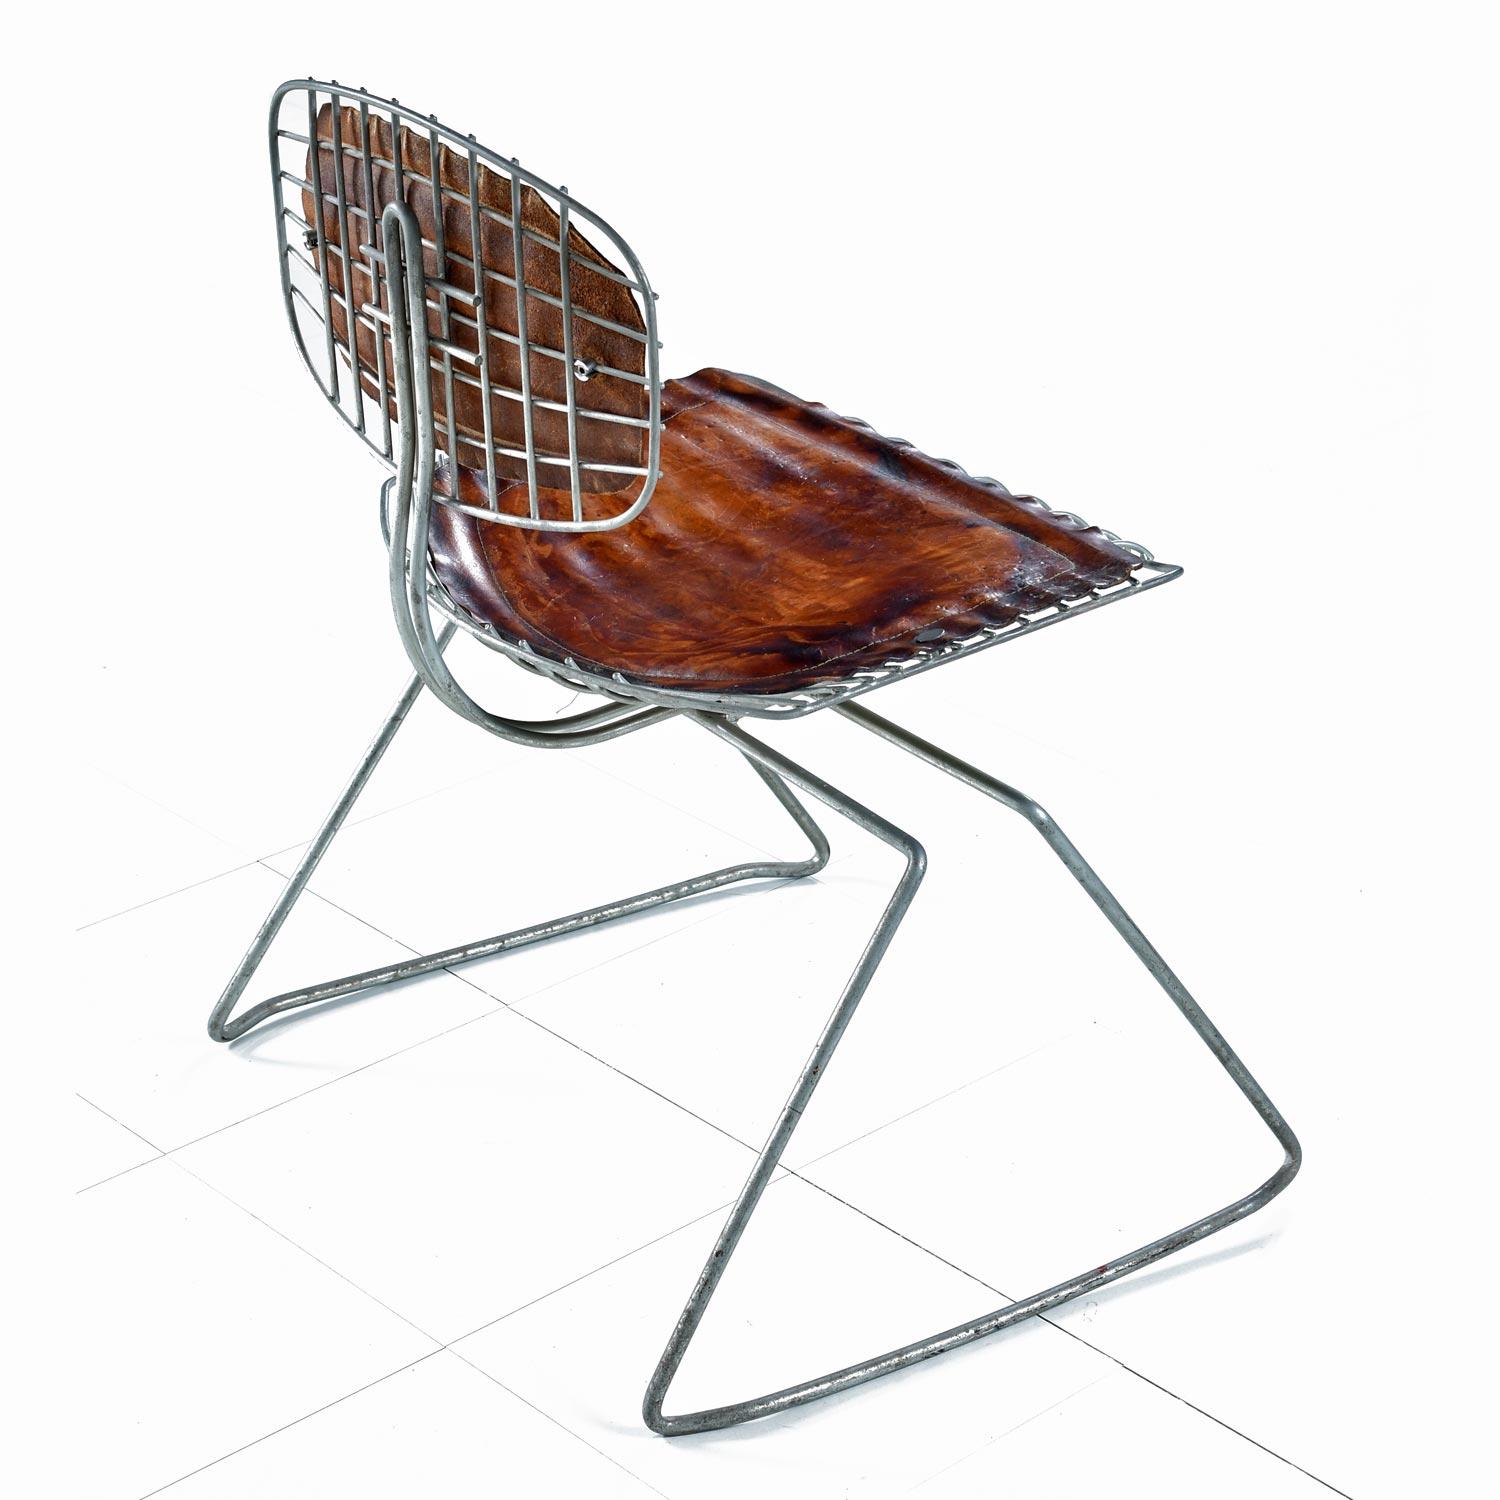 Sold as a pair
The Beaubourg chair was conceived by Richard Rogers and Renzo Piano and designed specifically for the Pompidou Center in Paris. The final form was created by Georges Laurent and Michel Cadestin. The Beaubourg chair was selected as